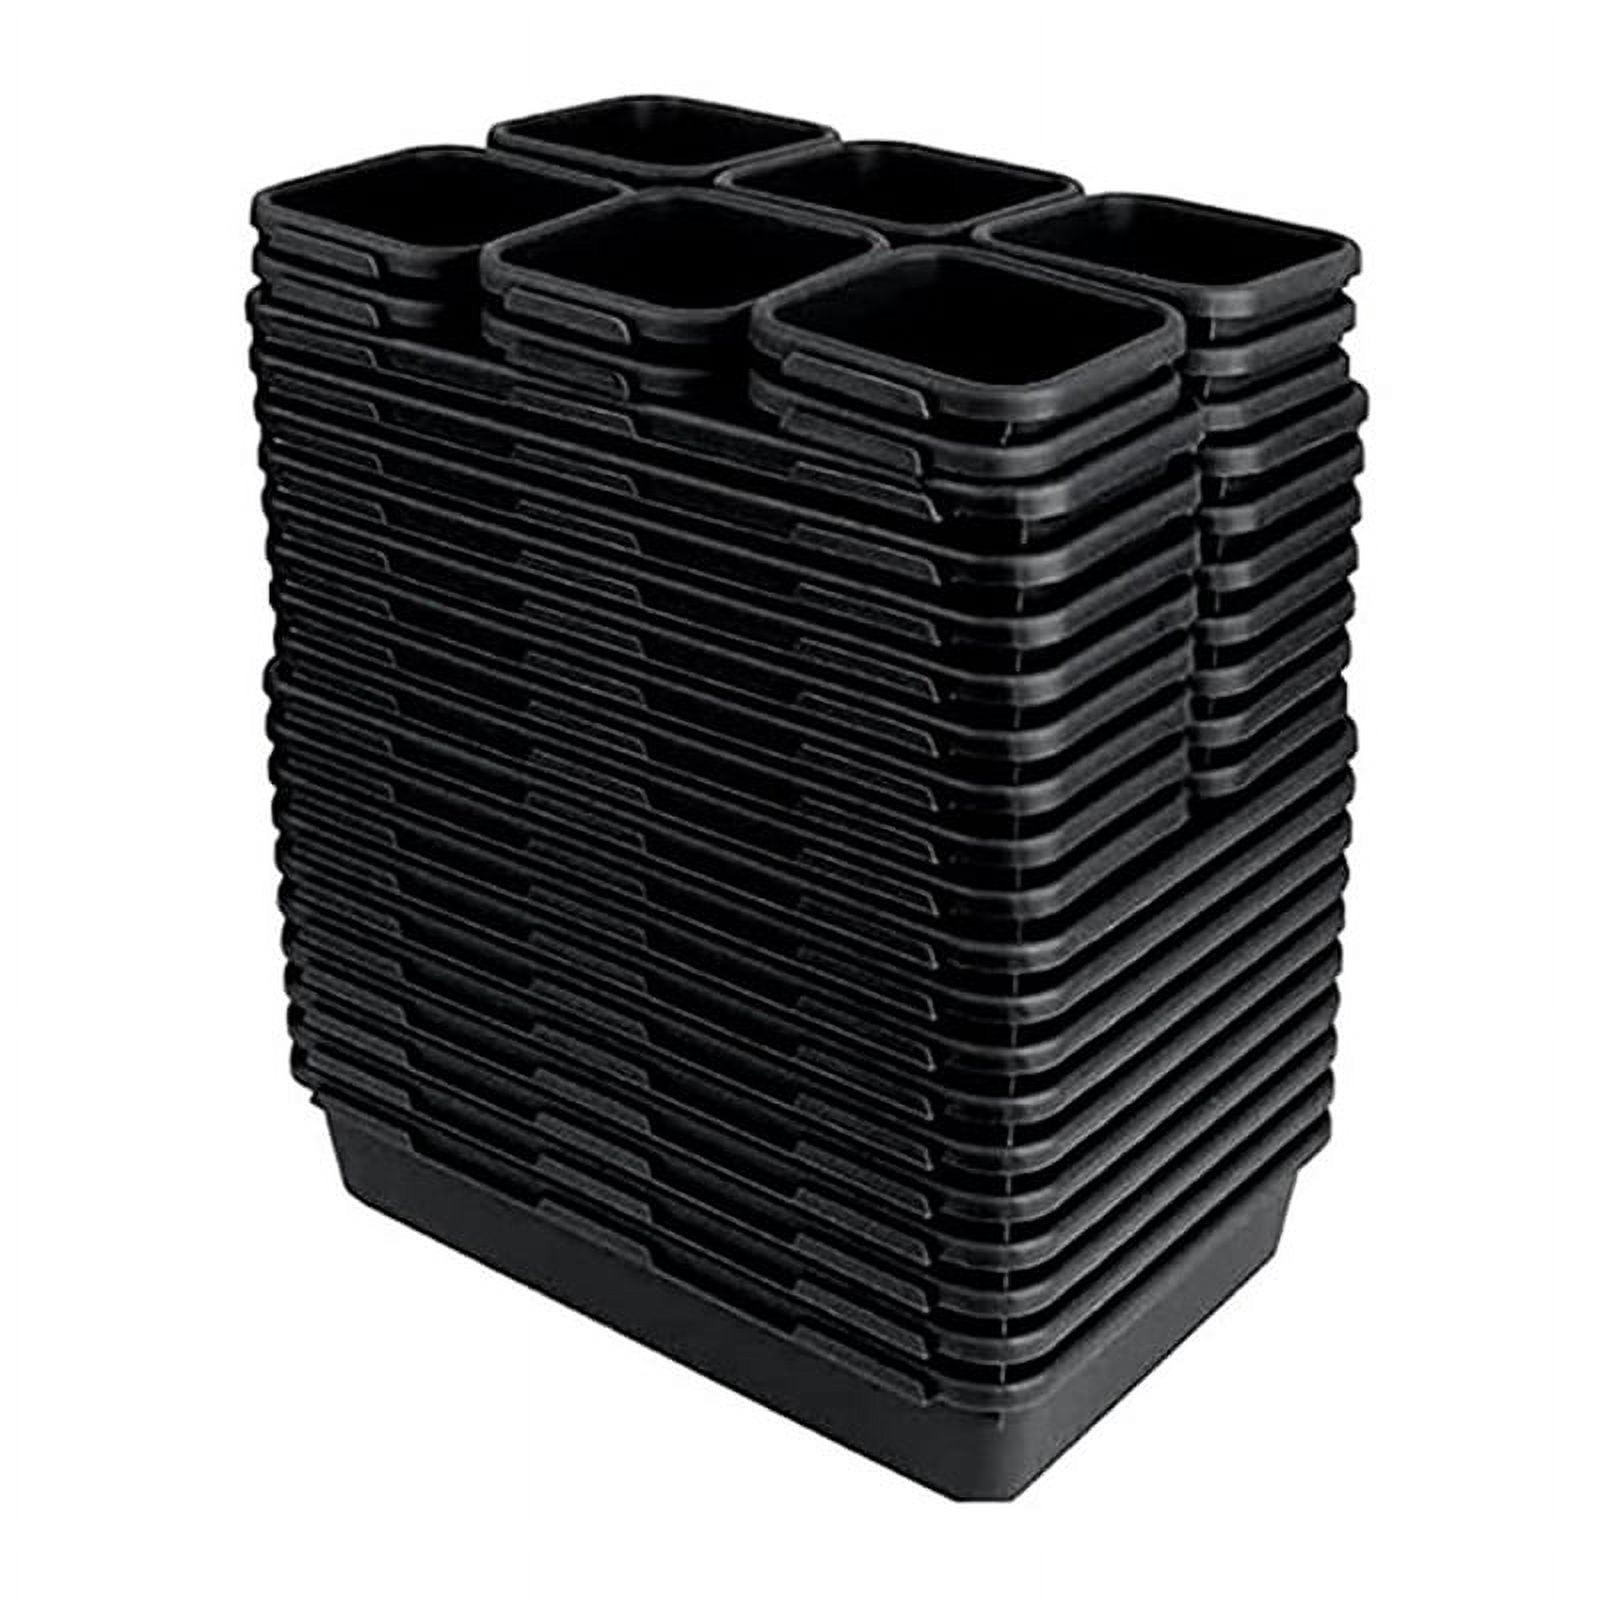 China Bin with Dividers Manufacturers Suppliers Factory - Custom Bin with  Dividers